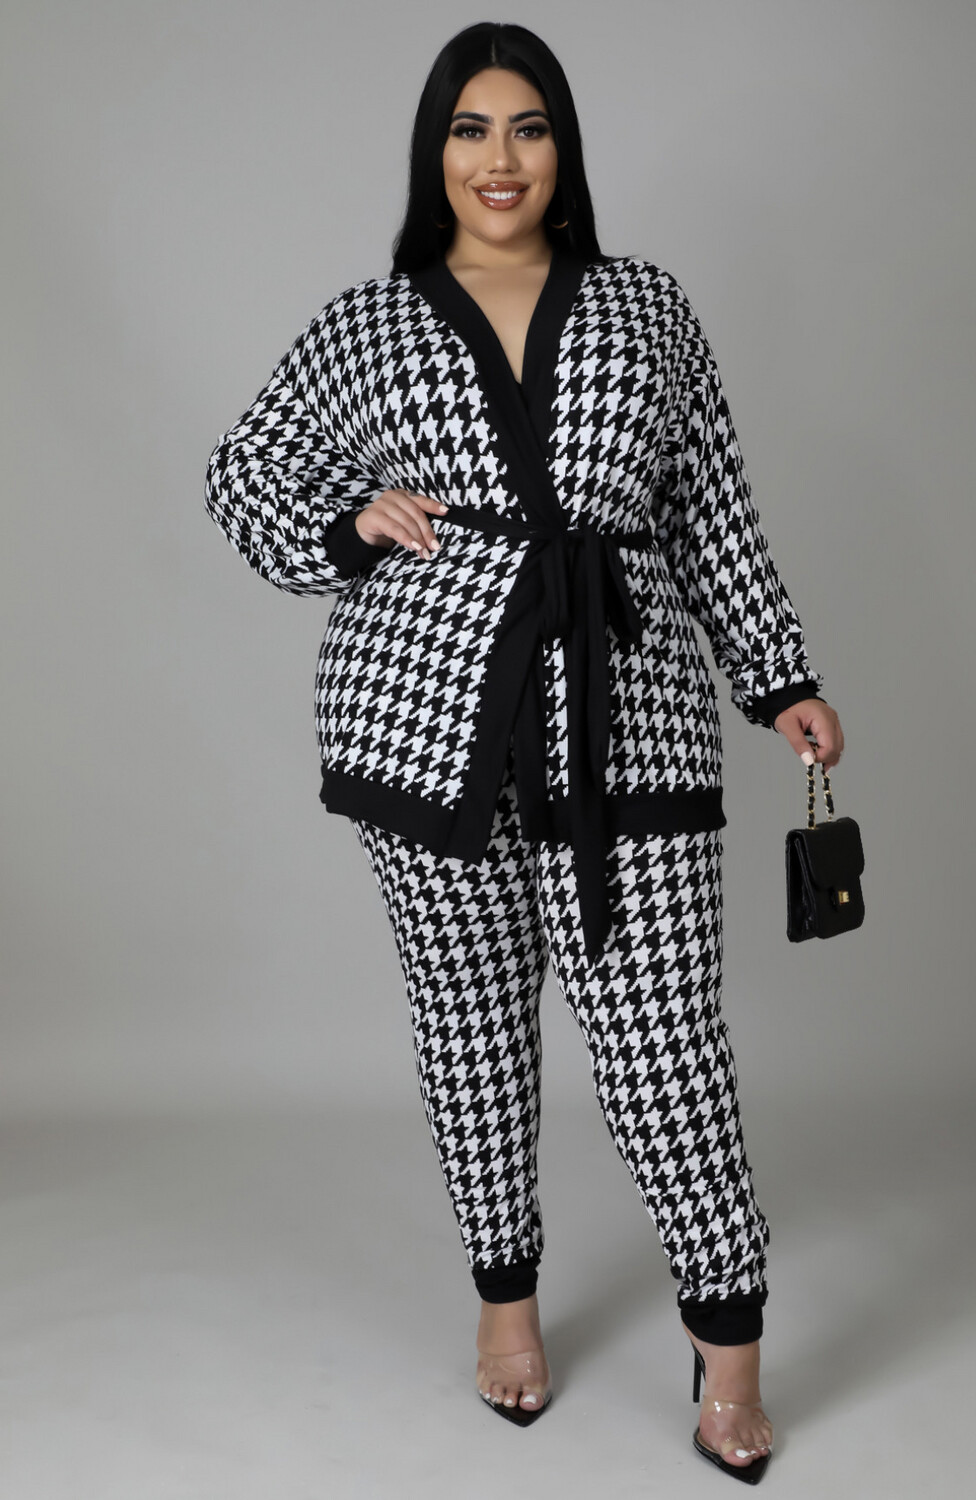 The Houndstooth Set With Belt